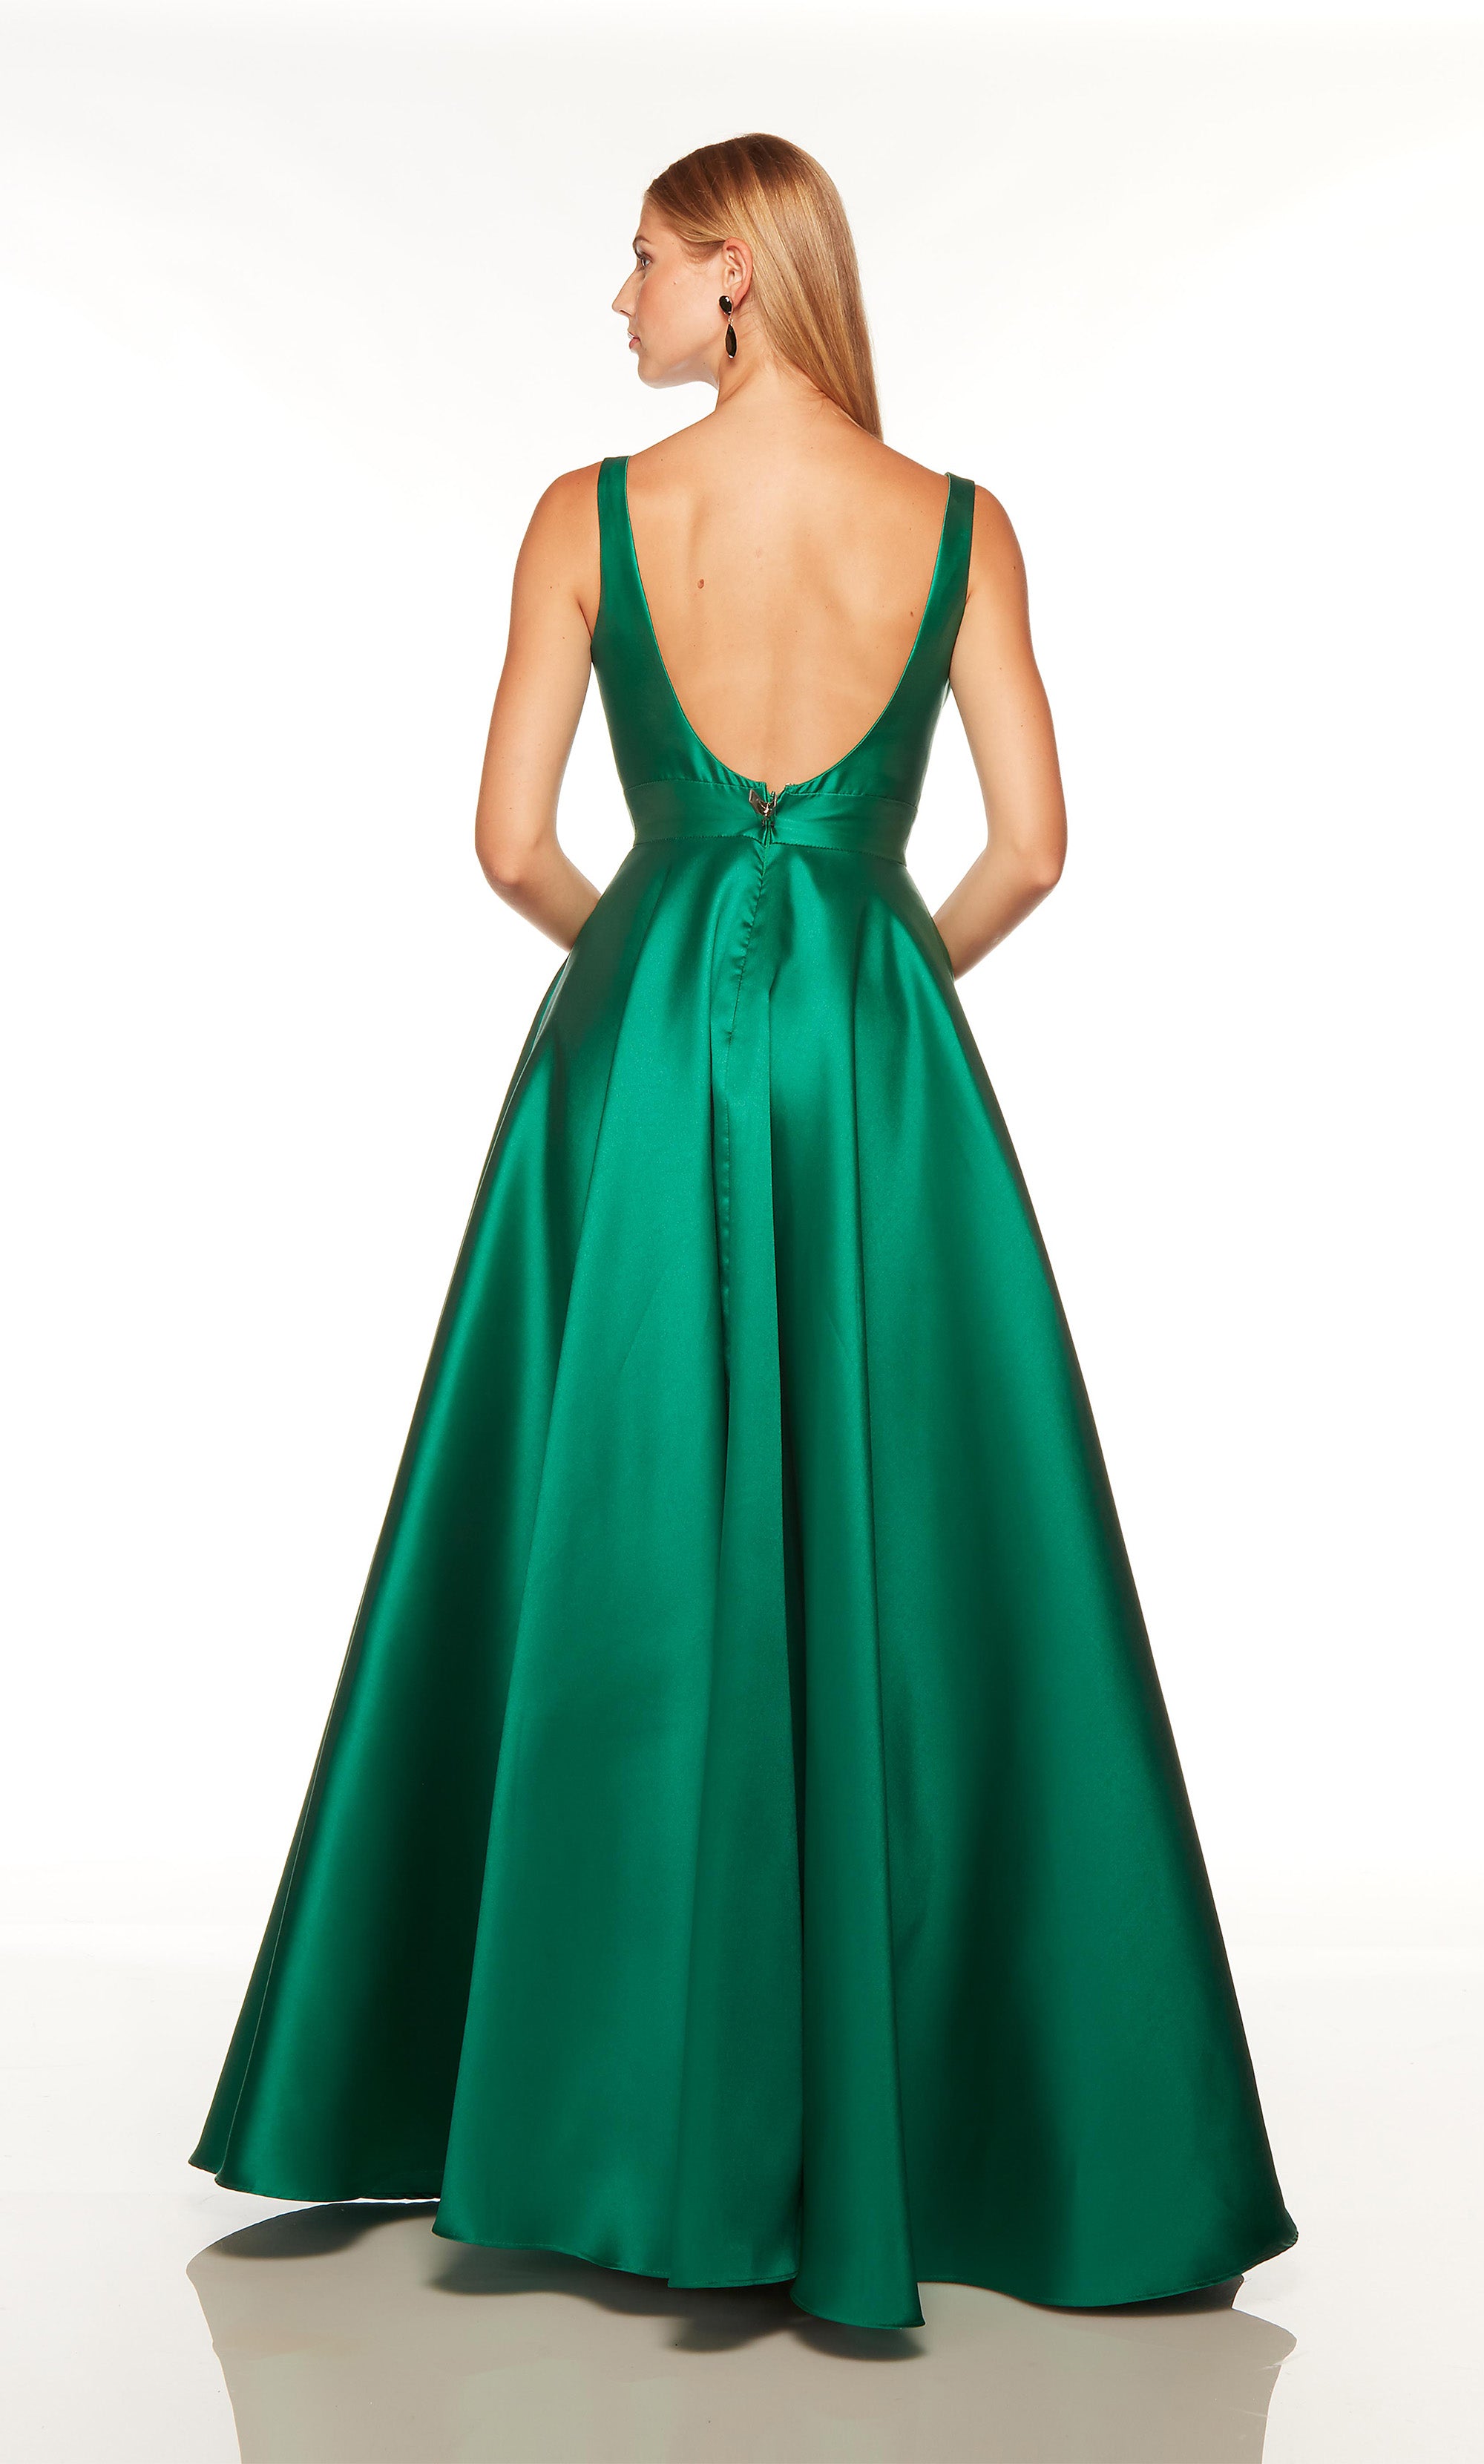 Green prom dress with a plunging neckline and pockets. COLOR-SWATCH_1757__PINE